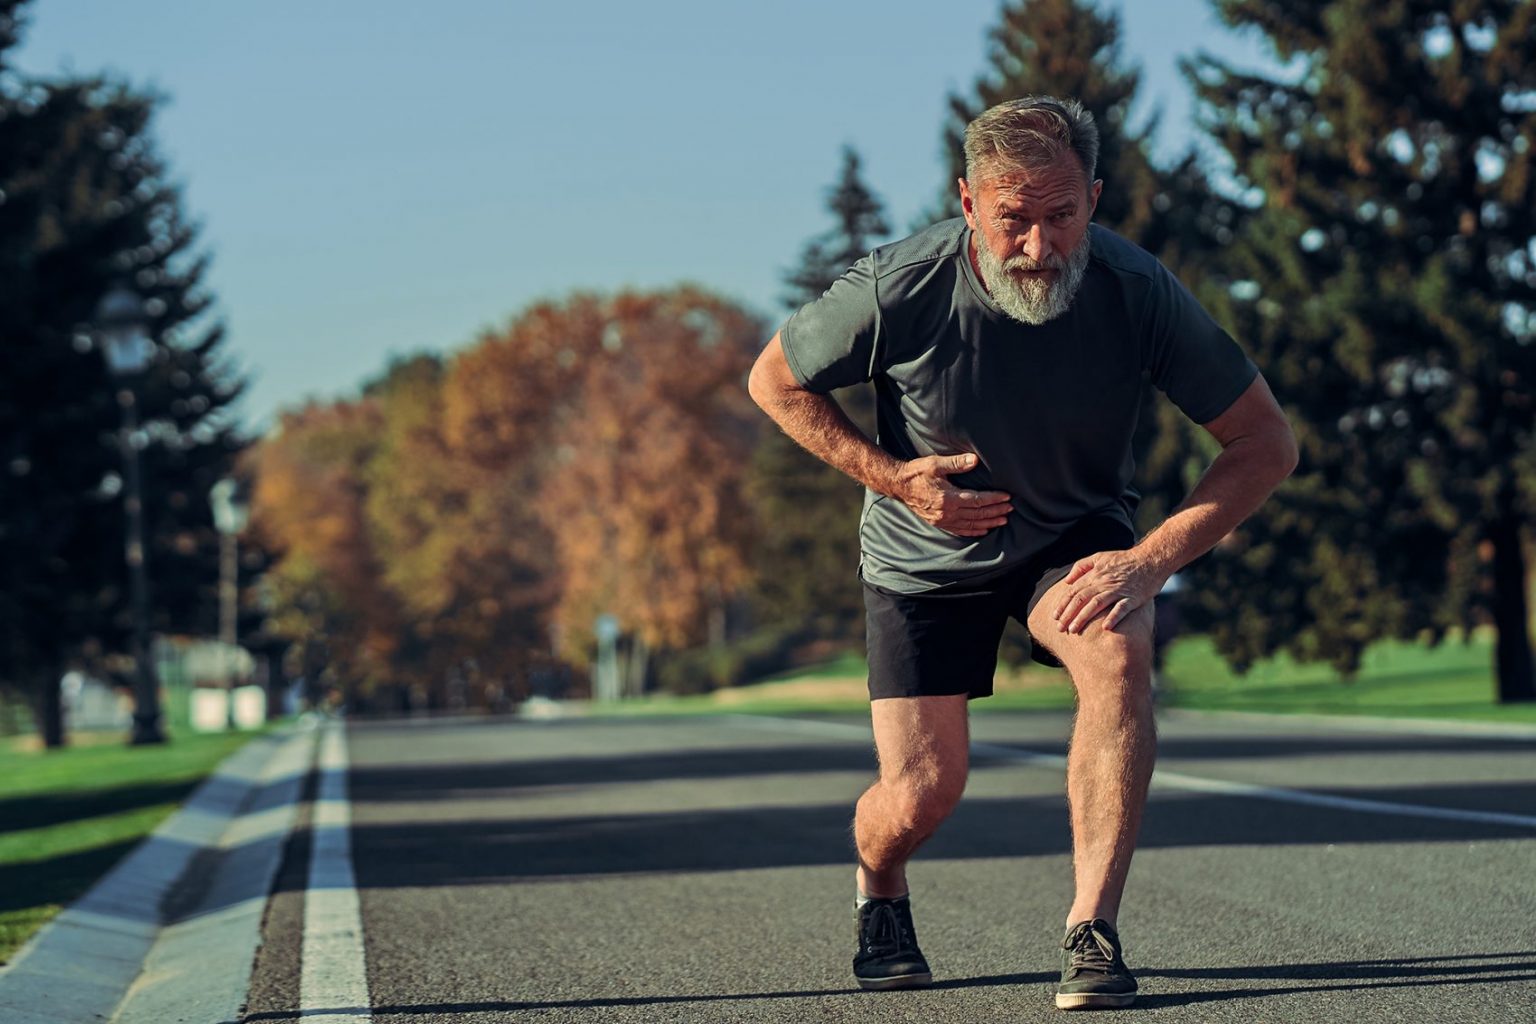 Will you still be doing triathlons when you are 90?